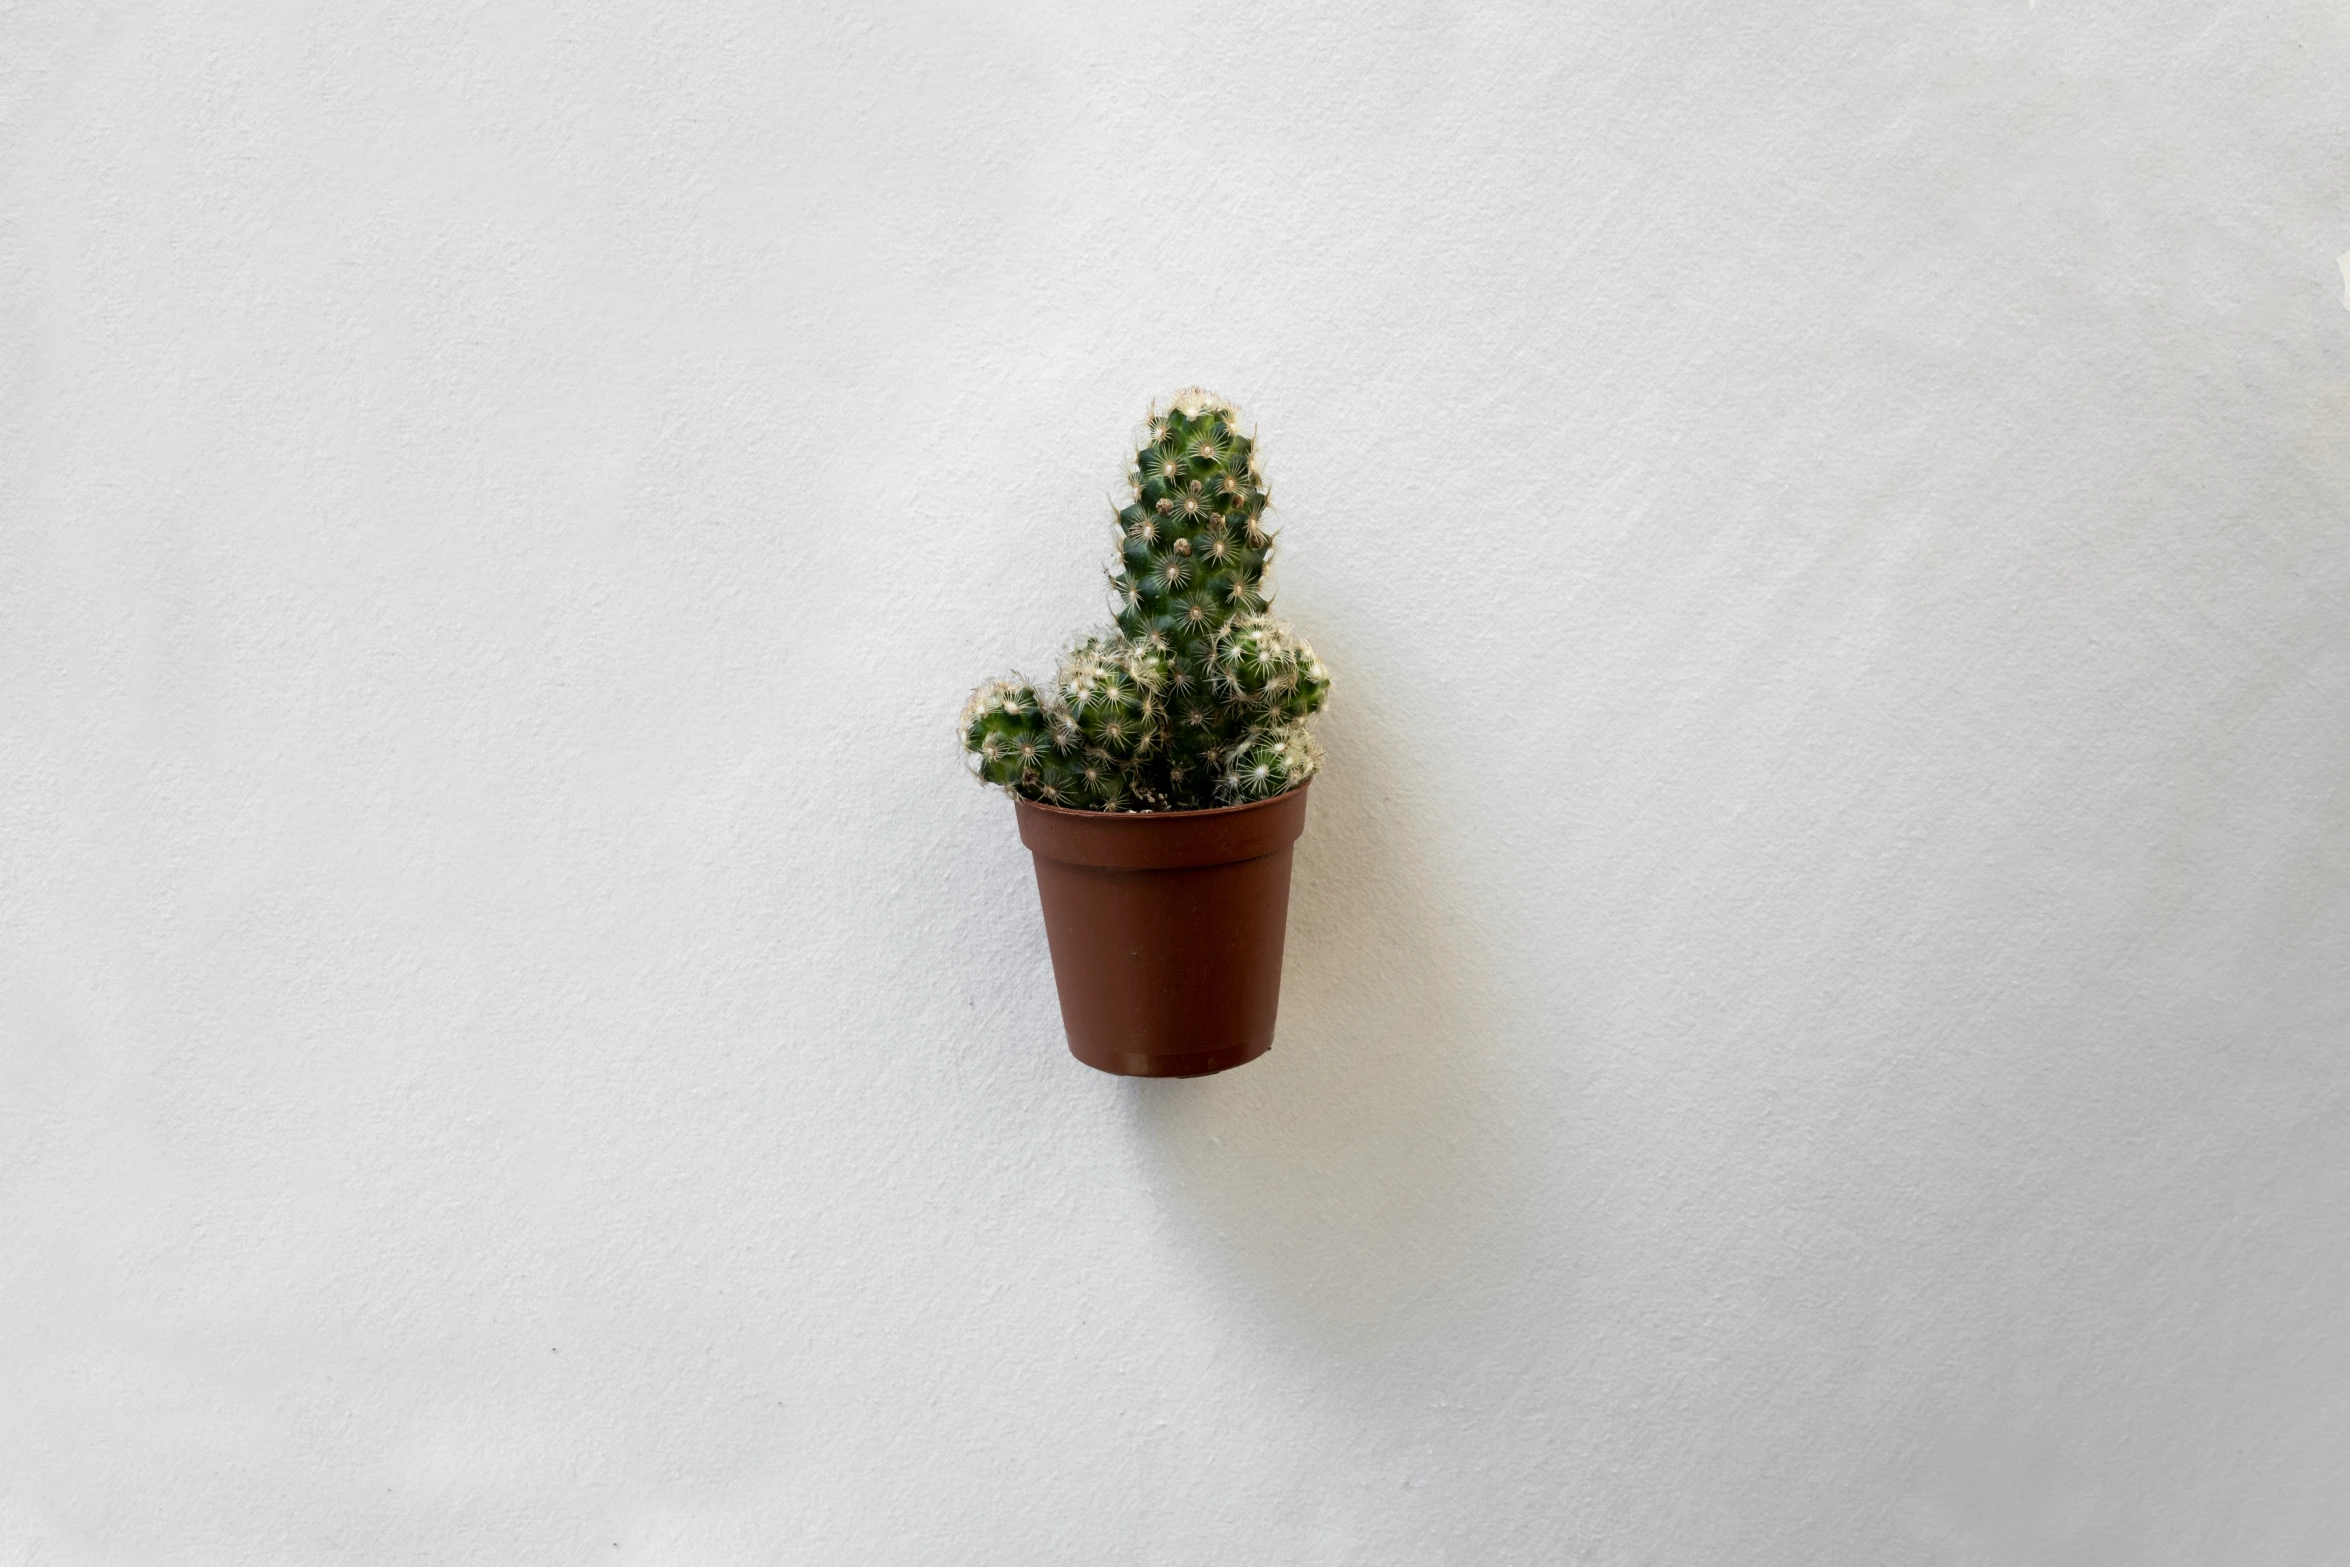 small potted plant against a plain wall